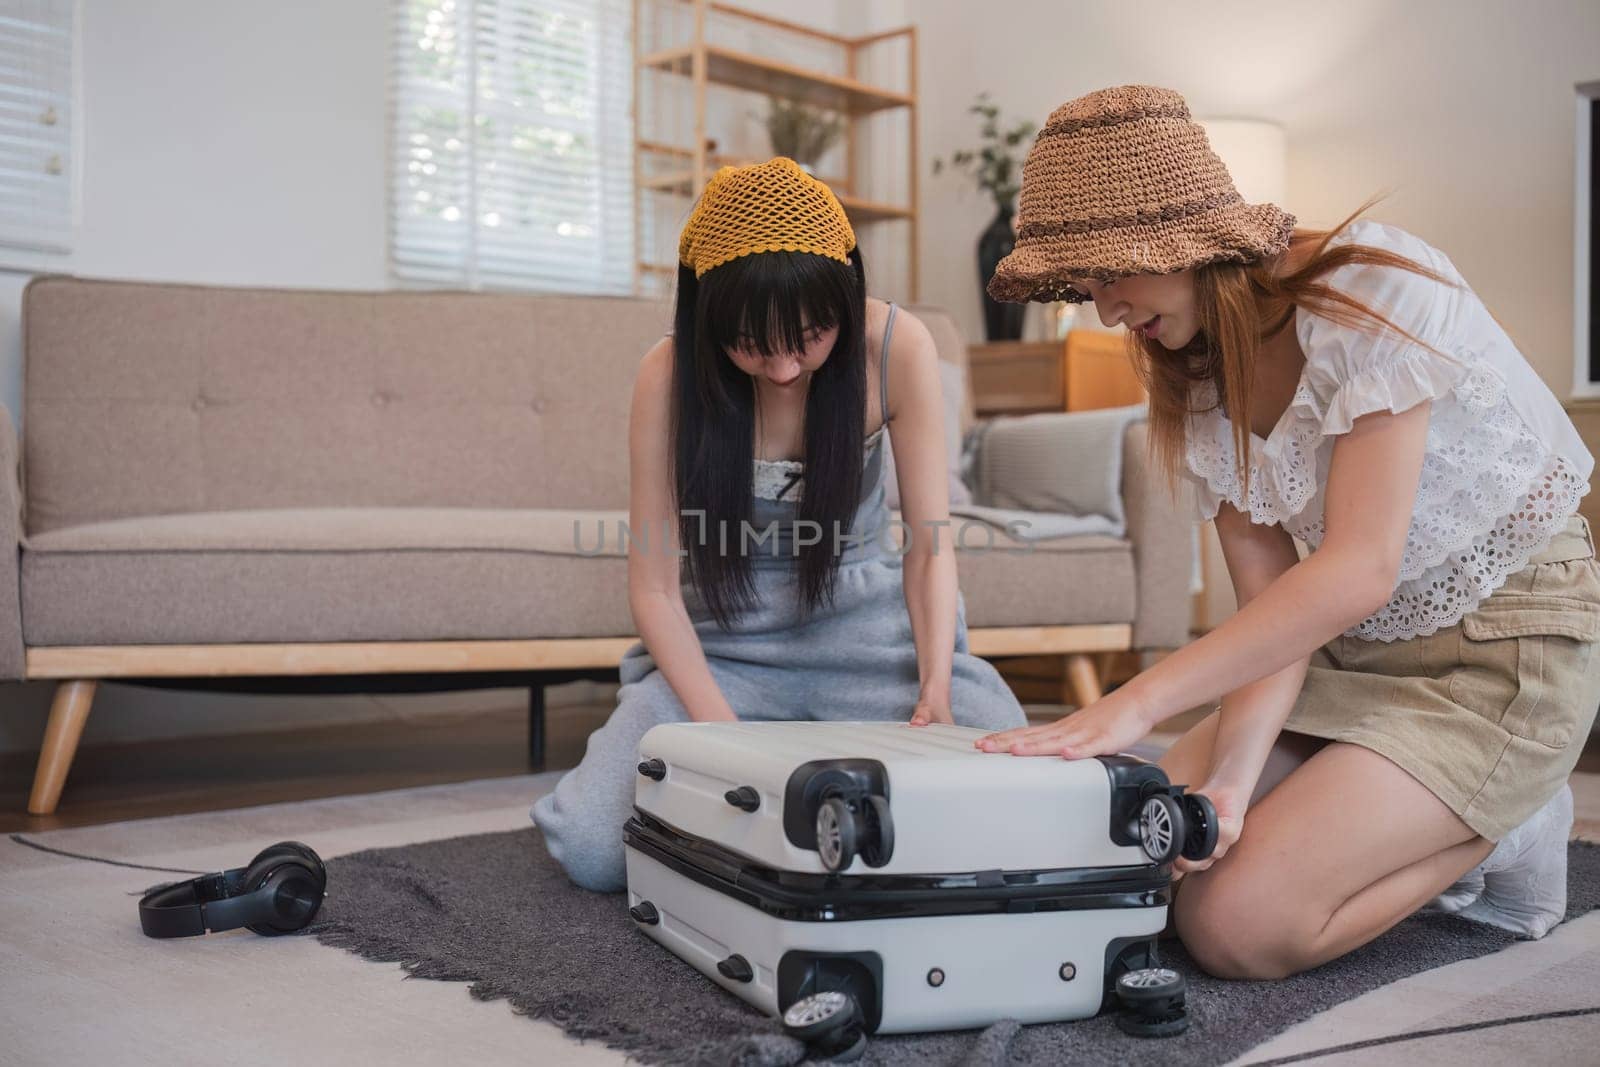 Two women are looking at a suitcase on the floor. One of them is wearing a yellow hat